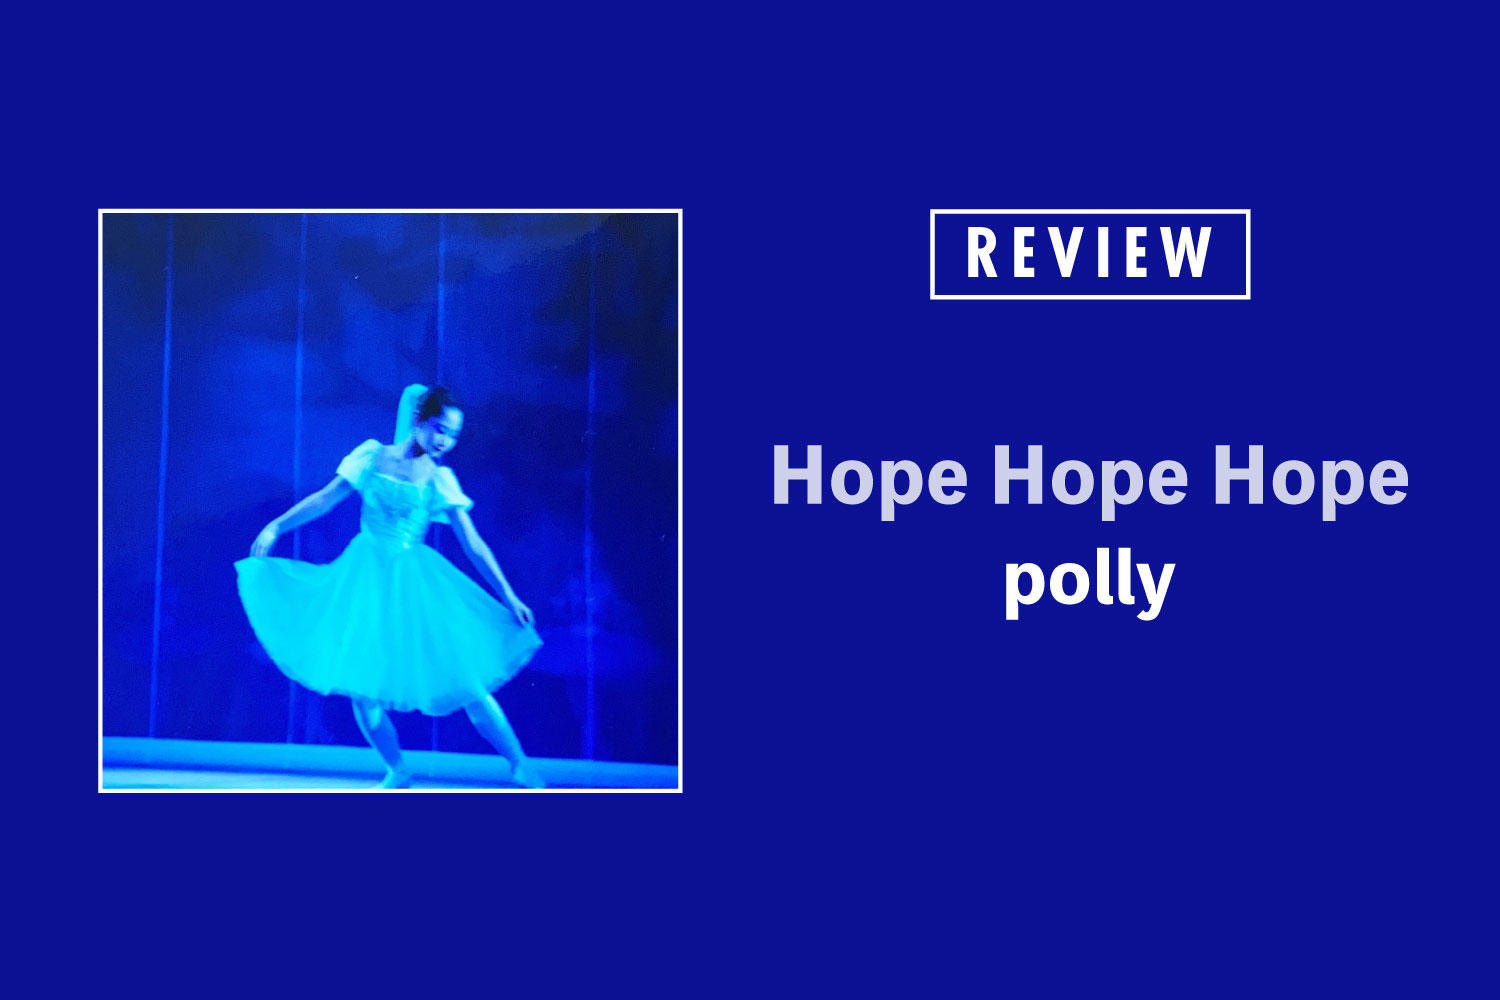 polly「Hope Hope Hope」──別れと喪失から希望を紡ぐ、新体制pollyによる初のアルバム